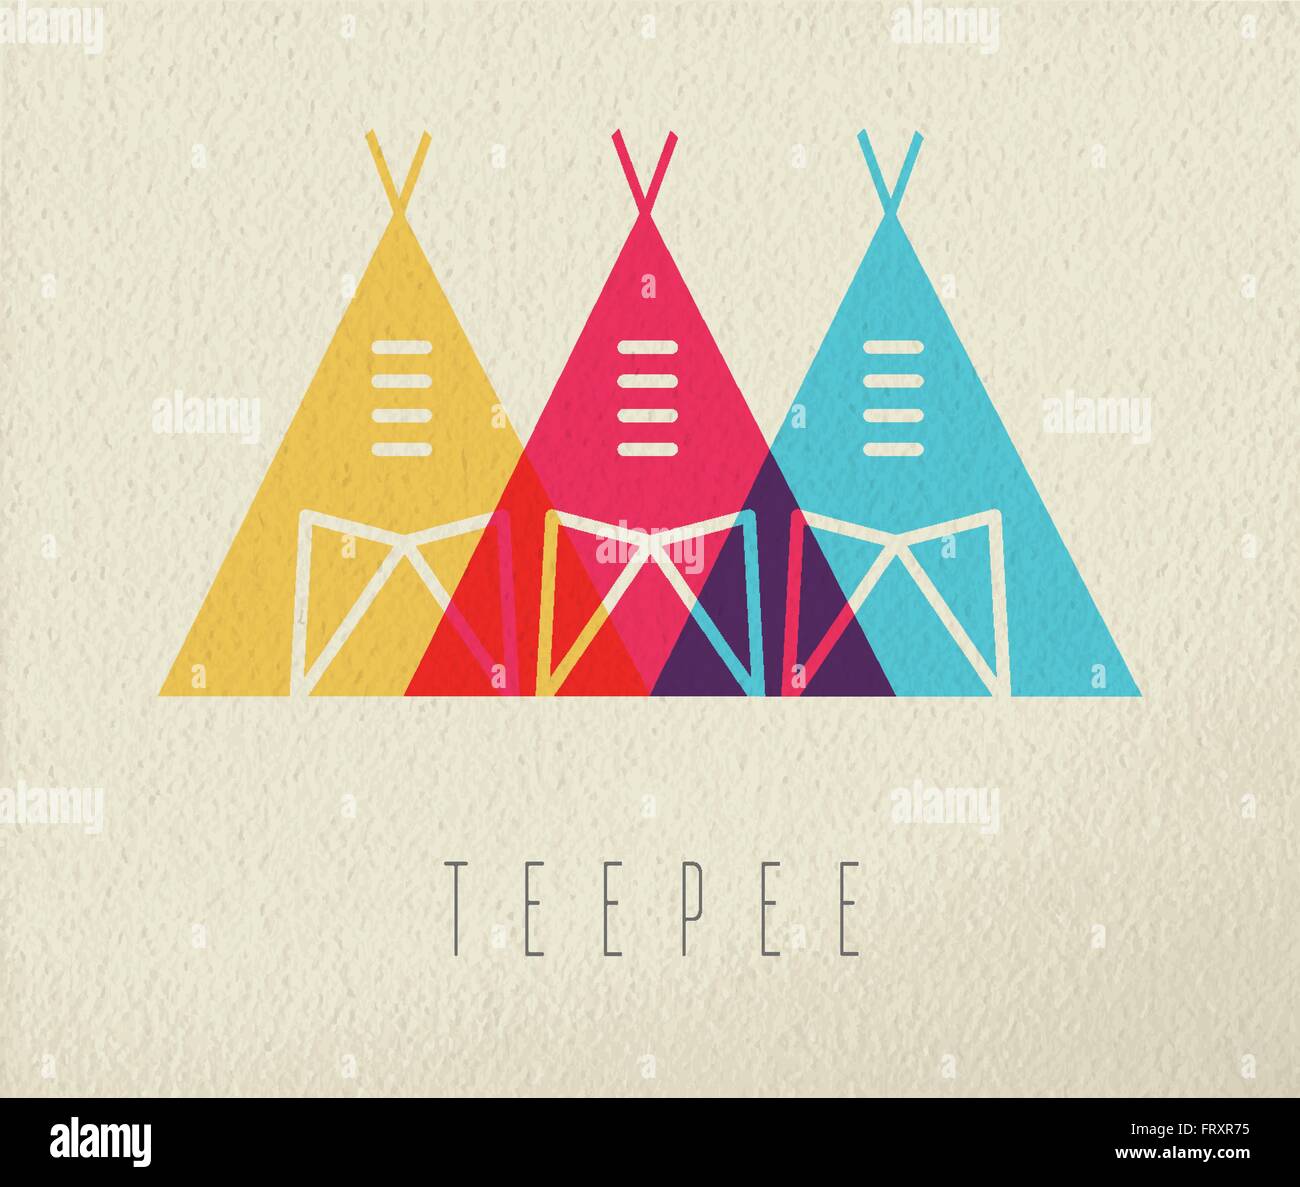 Tipi tent concept icon, illustration of native american indian traditional house in color style over texture background. Stock Vector